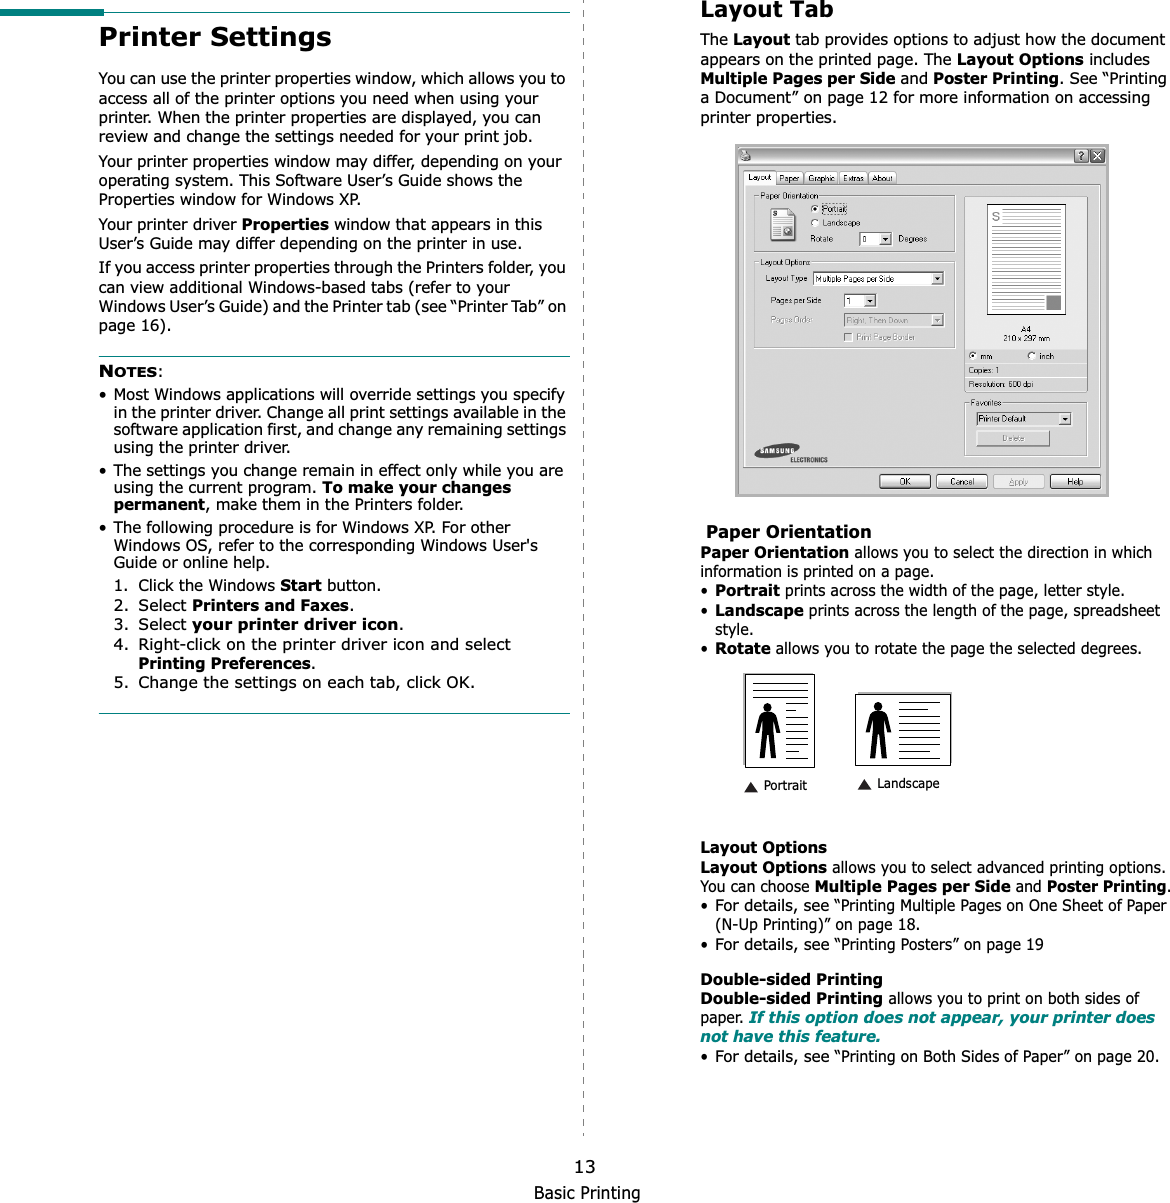 Basic Printing13Printer SettingsYou can use the printer properties window, which allows you to access all of the printer options you need when using your printer. When the printer properties are displayed, you can review and change the settings needed for your print job. Your printer properties window may differ, depending on your operating system. This Software User’s Guide shows the Properties window for Windows XP.Your printer driver Properties window that appears in this User’s Guide may differ depending on the printer in use.If you access printer properties through the Printers folder, you can view additional Windows-based tabs (refer to your Windows User’s Guide) and the Printer tab (see “Printer Tab” on page 16).NOTES:• Most Windows applications will override settings you specify in the printer driver. Change all print settings available in the software application first, and change any remaining settings using the printer driver. • The settings you change remain in effect only while you are using the current program. To make your changes permanent, make them in the Printers folder. • The following procedure is for Windows XP. For other Windows OS, refer to the corresponding Windows User&apos;s Guide or online help.1. Click the Windows Start button.2. Select Printers and Faxes.3. Select your printer driver icon.4. Right-click on the printer driver icon and select Printing Preferences.5. Change the settings on each tab, click OK.Layout TabThe Layout tab provides options to adjust how the document appears on the printed page. The Layout Options includes Multiple Pages per Side and Poster Printing. See “Printing a Document” on page 12 for more information on accessing printer properties.  Paper OrientationPaper Orientation allows you to select the direction in which information is printed on a page. •Portrait prints across the width of the page, letter style. •Landscape prints across the length of the page, spreadsheet style. •Rotate allows you to rotate the page the selected degrees.Layout OptionsLayout Options allows you to select advanced printing options. You can choose Multiple Pages per Side and Poster Printing.•For details, see “Printing Multiple Pages on One Sheet of Paper (N-Up Printing)” on page 18.•For details, see “Printing Posters” on page 19Double-sided PrintingDouble-sided Printing allows you to print on both sides of paper. If this option does not appear, your printer does not have this feature.•For details, see “Printing on Both Sides of Paper” on page 20. Landscape Portrait